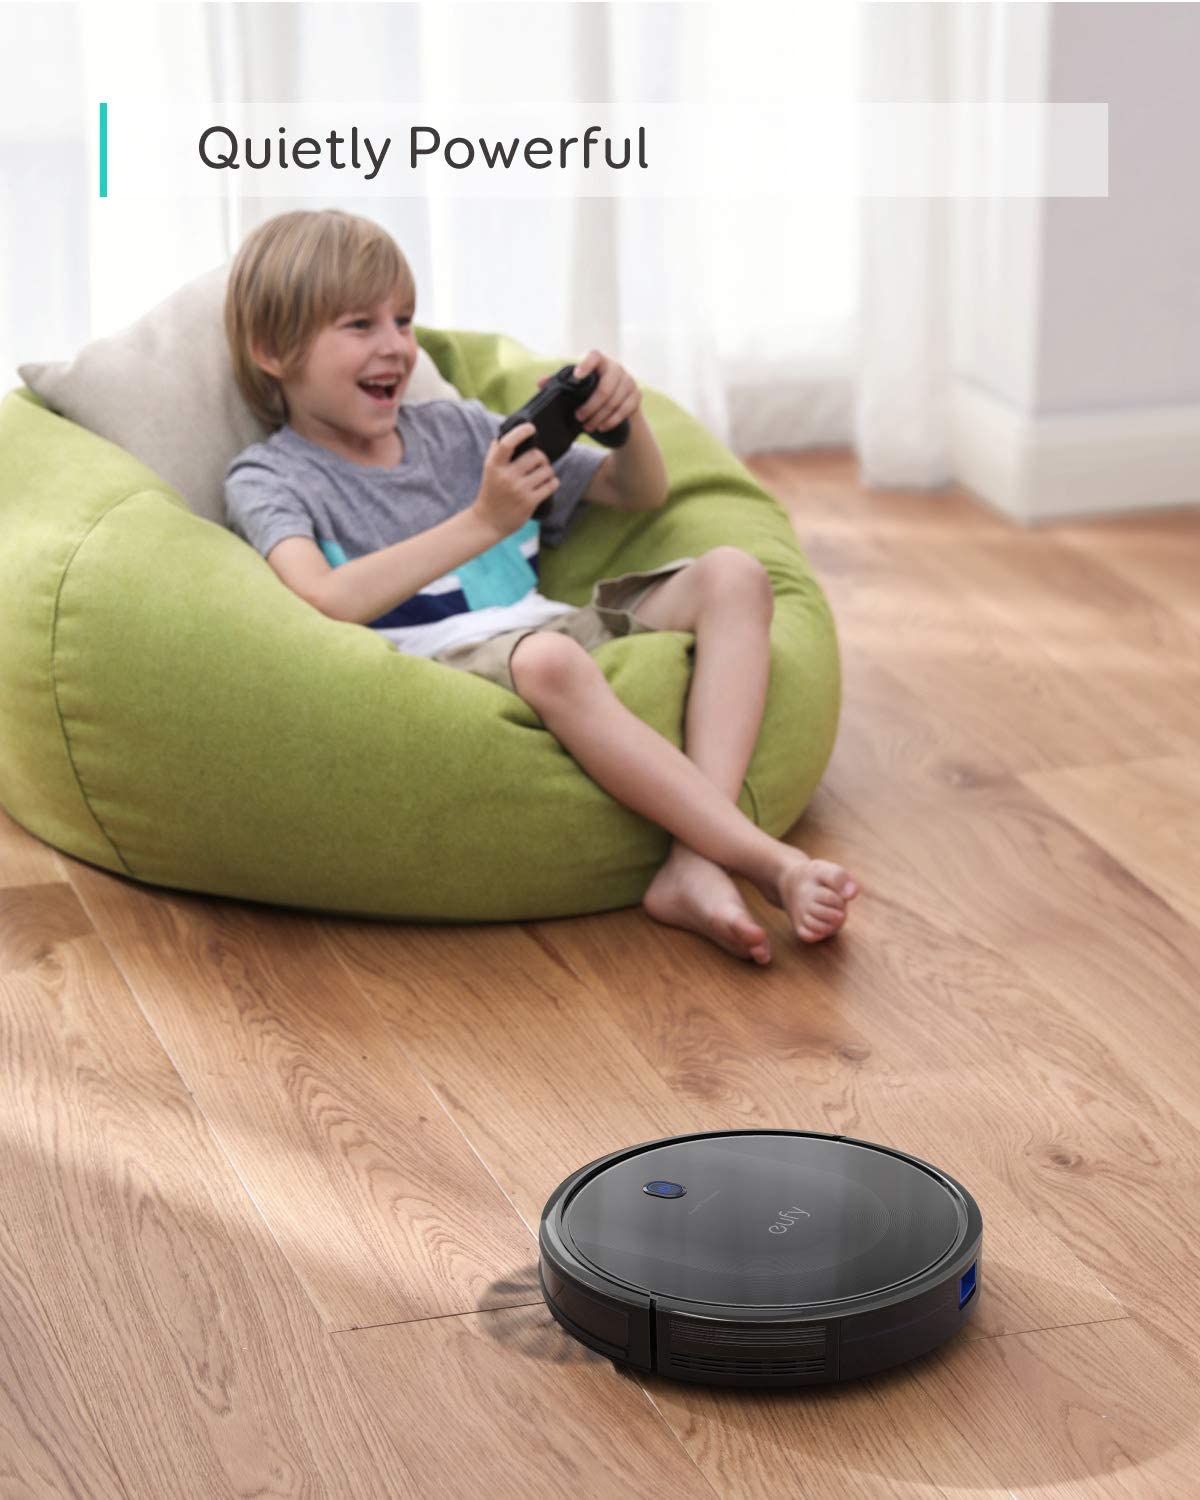 eufy BoostIQ RoboVac 11S MAX, Robot Vacuum Cleaner, 2000Pa Suction, Quiet, Self-Charging, Black - image 3 of 7